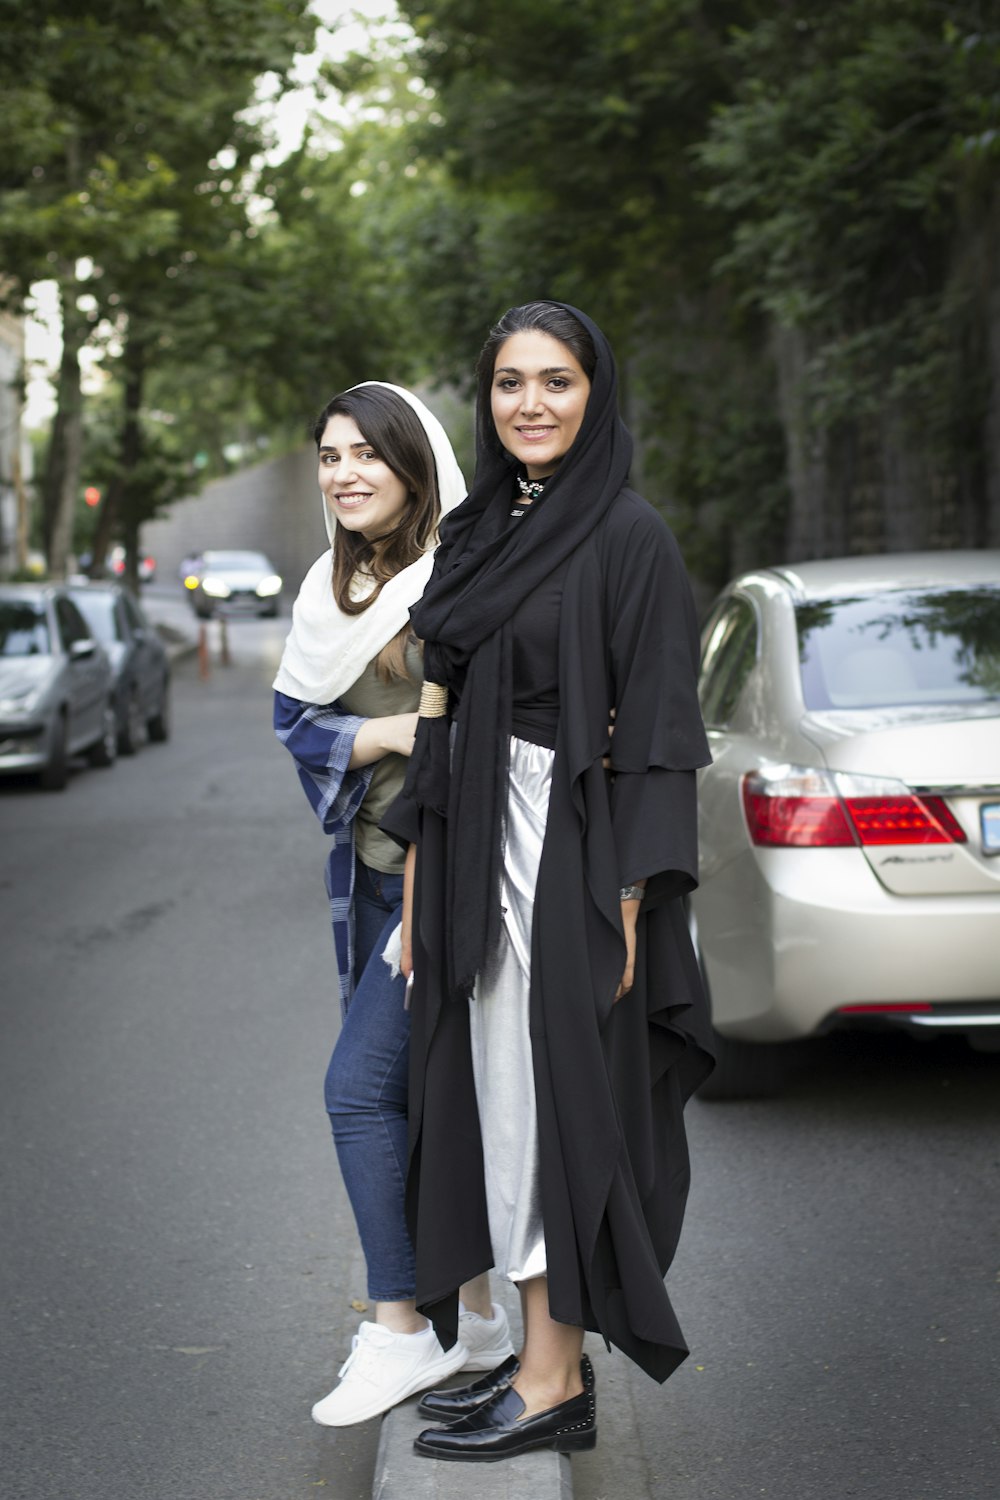 two women standing next to each other on a street